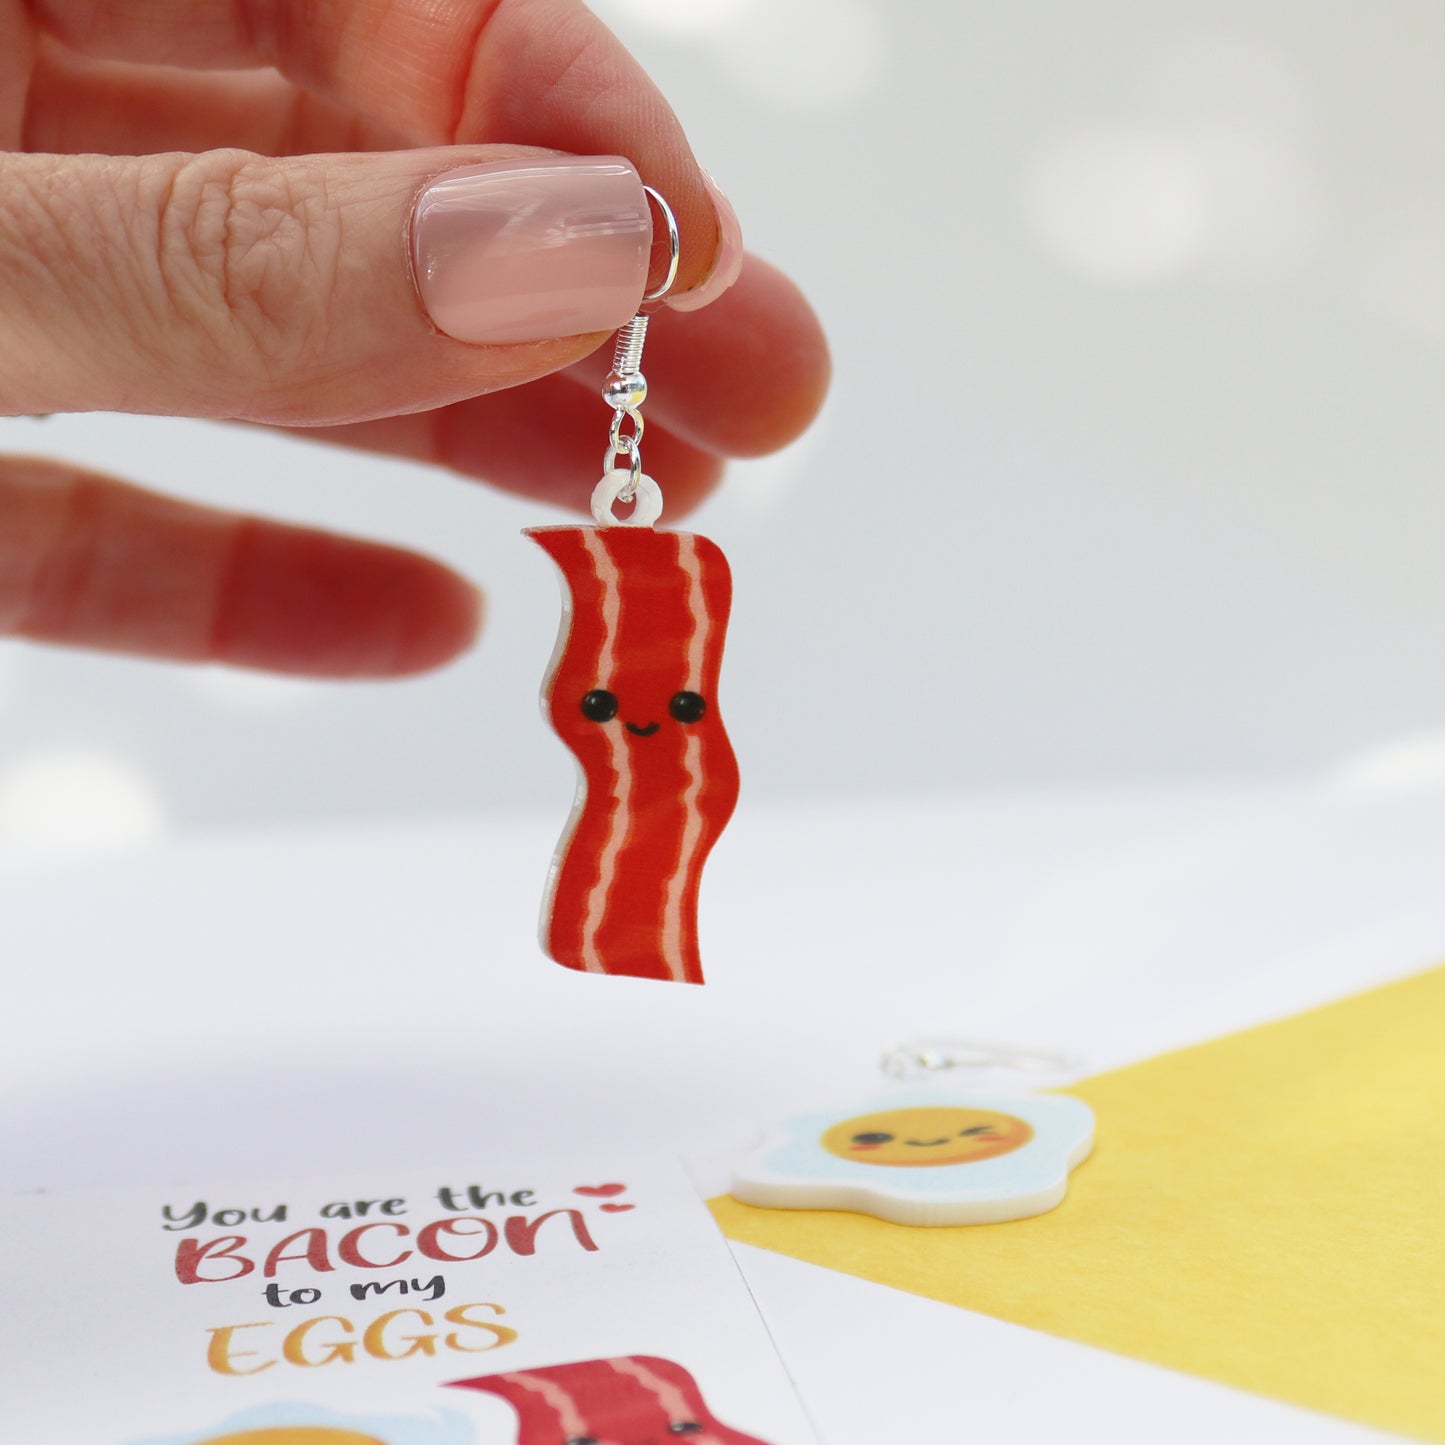 acrylic bacon to my egg acrylic printed earrrings valentine&#39;s day earrings funny valentines earrings shown bacon being held